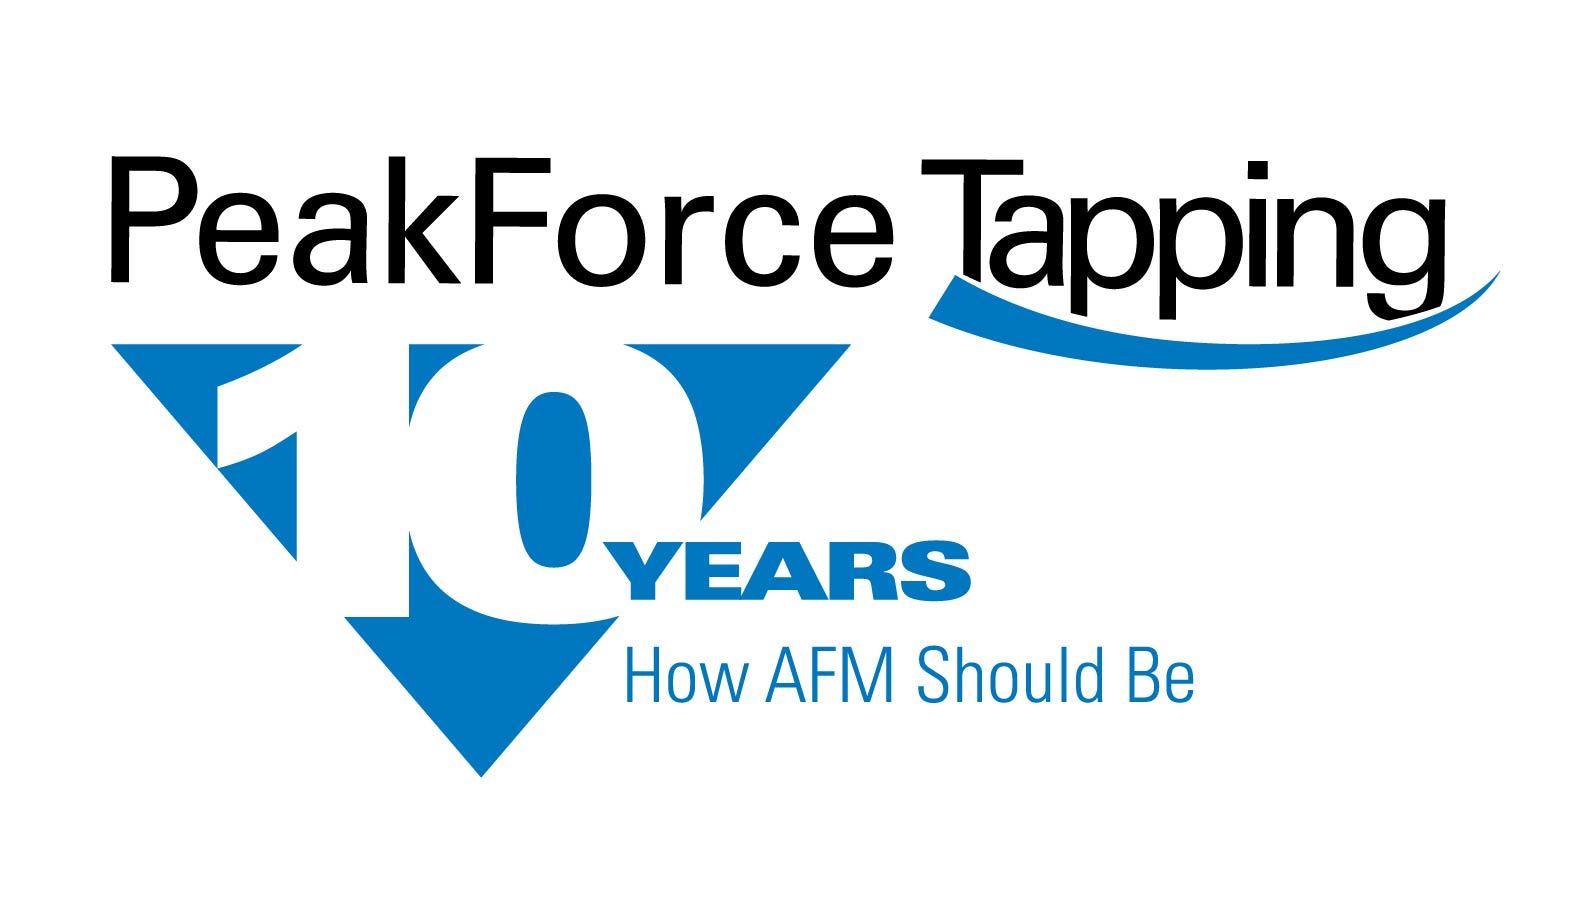 Peak Force Tapping 10 Year Logo 2019 091V5 Color Slogan